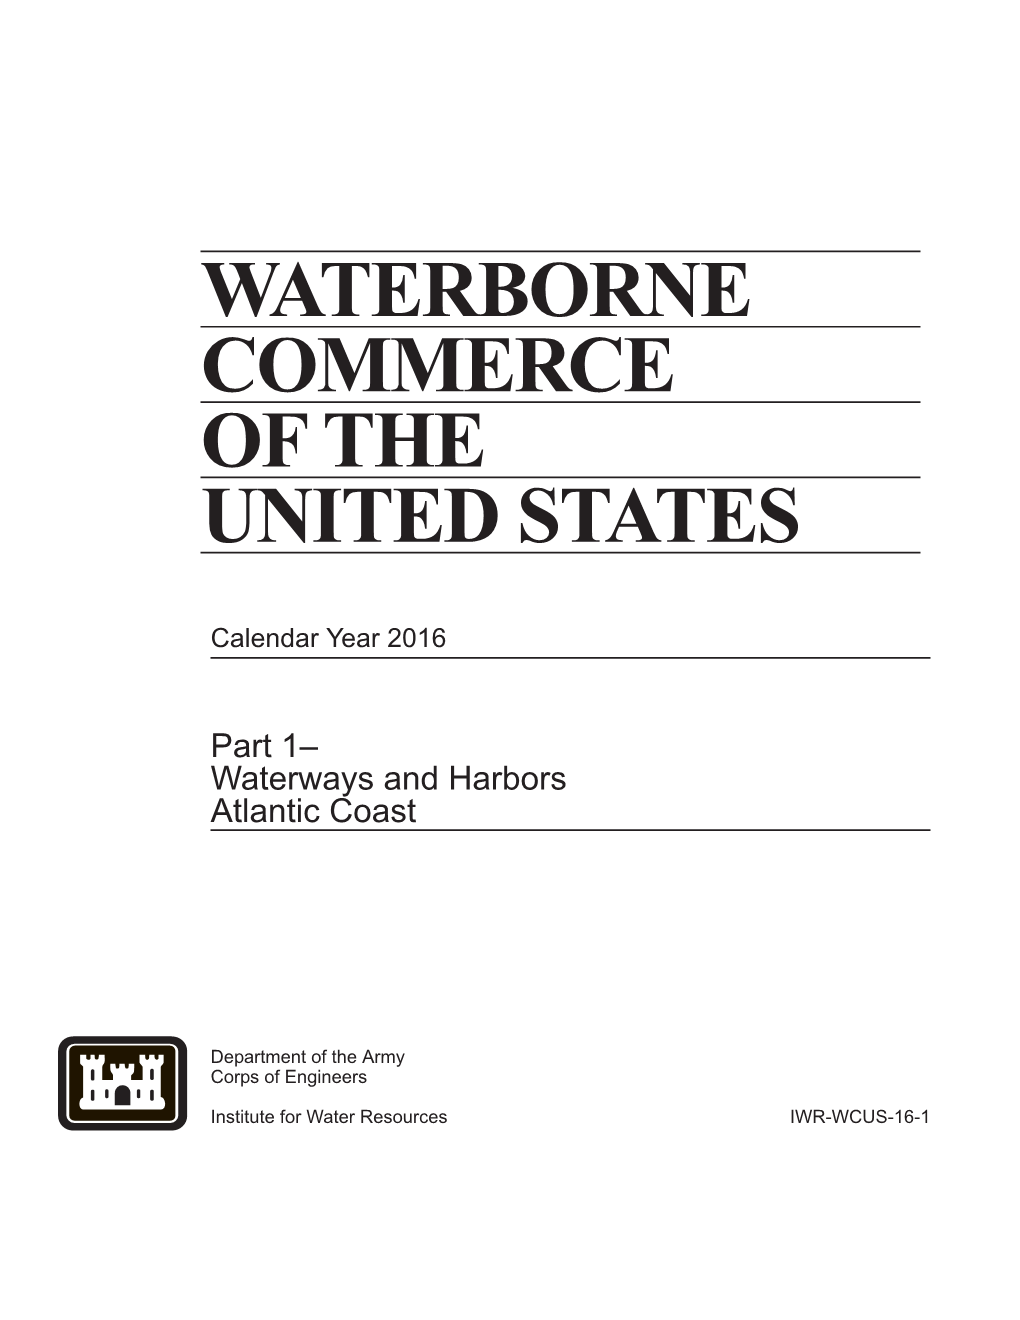 Waterborne Commerce of the United States